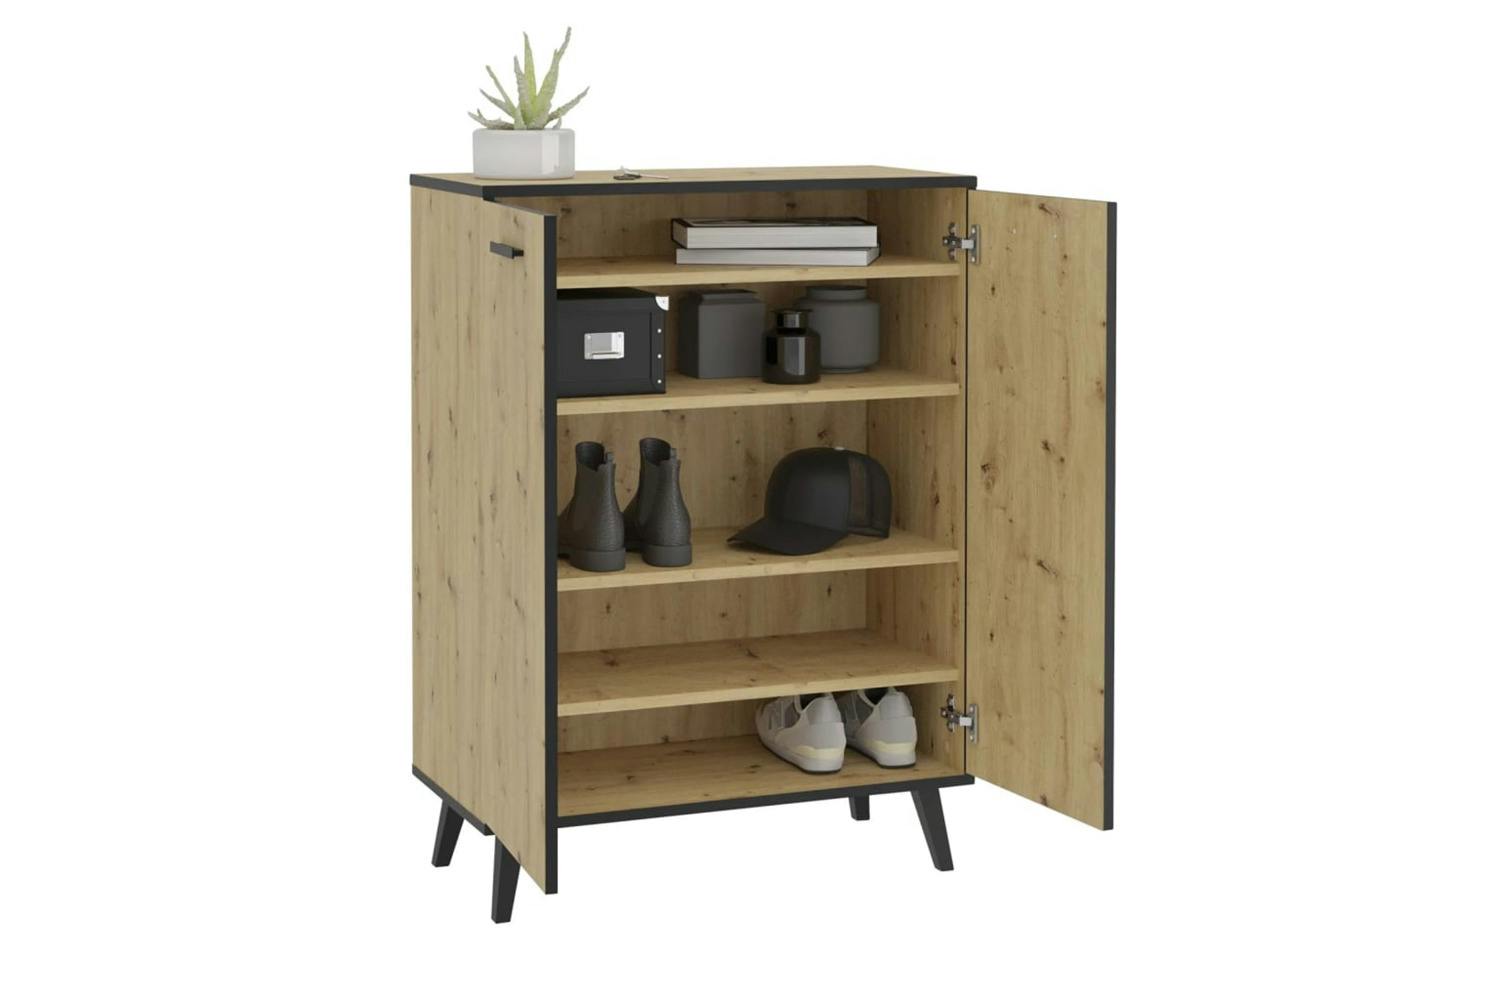 Fmd 444224 Shoe Cabinet With 5 Compartments 68.5x33x93.5 Cm Artisan Oak